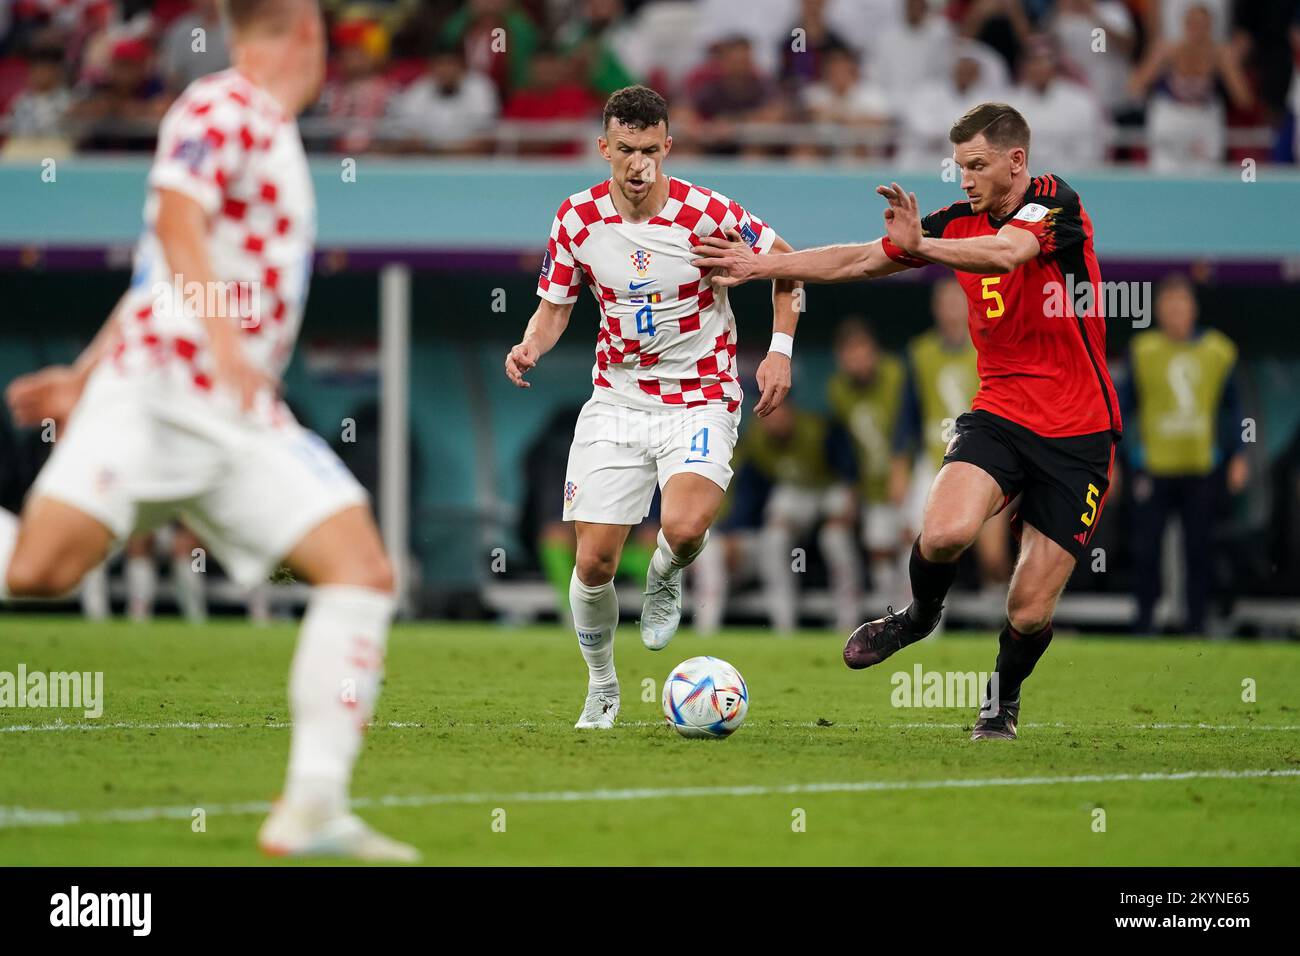 DOHA, QATAR - DECEMBER 1: Player of Croatia  Ivan Perisic fights for the ball with player of Belgium Jan Vertonghen during the FIFA World Cup Qatar 2022 group F match between Croatia and Belgium at Ahmad Bin Ali Stadium on December 1, 2022 in Doha, Qatar. (Photo by Florencia Tan Jun/PxImages) Stock Photo